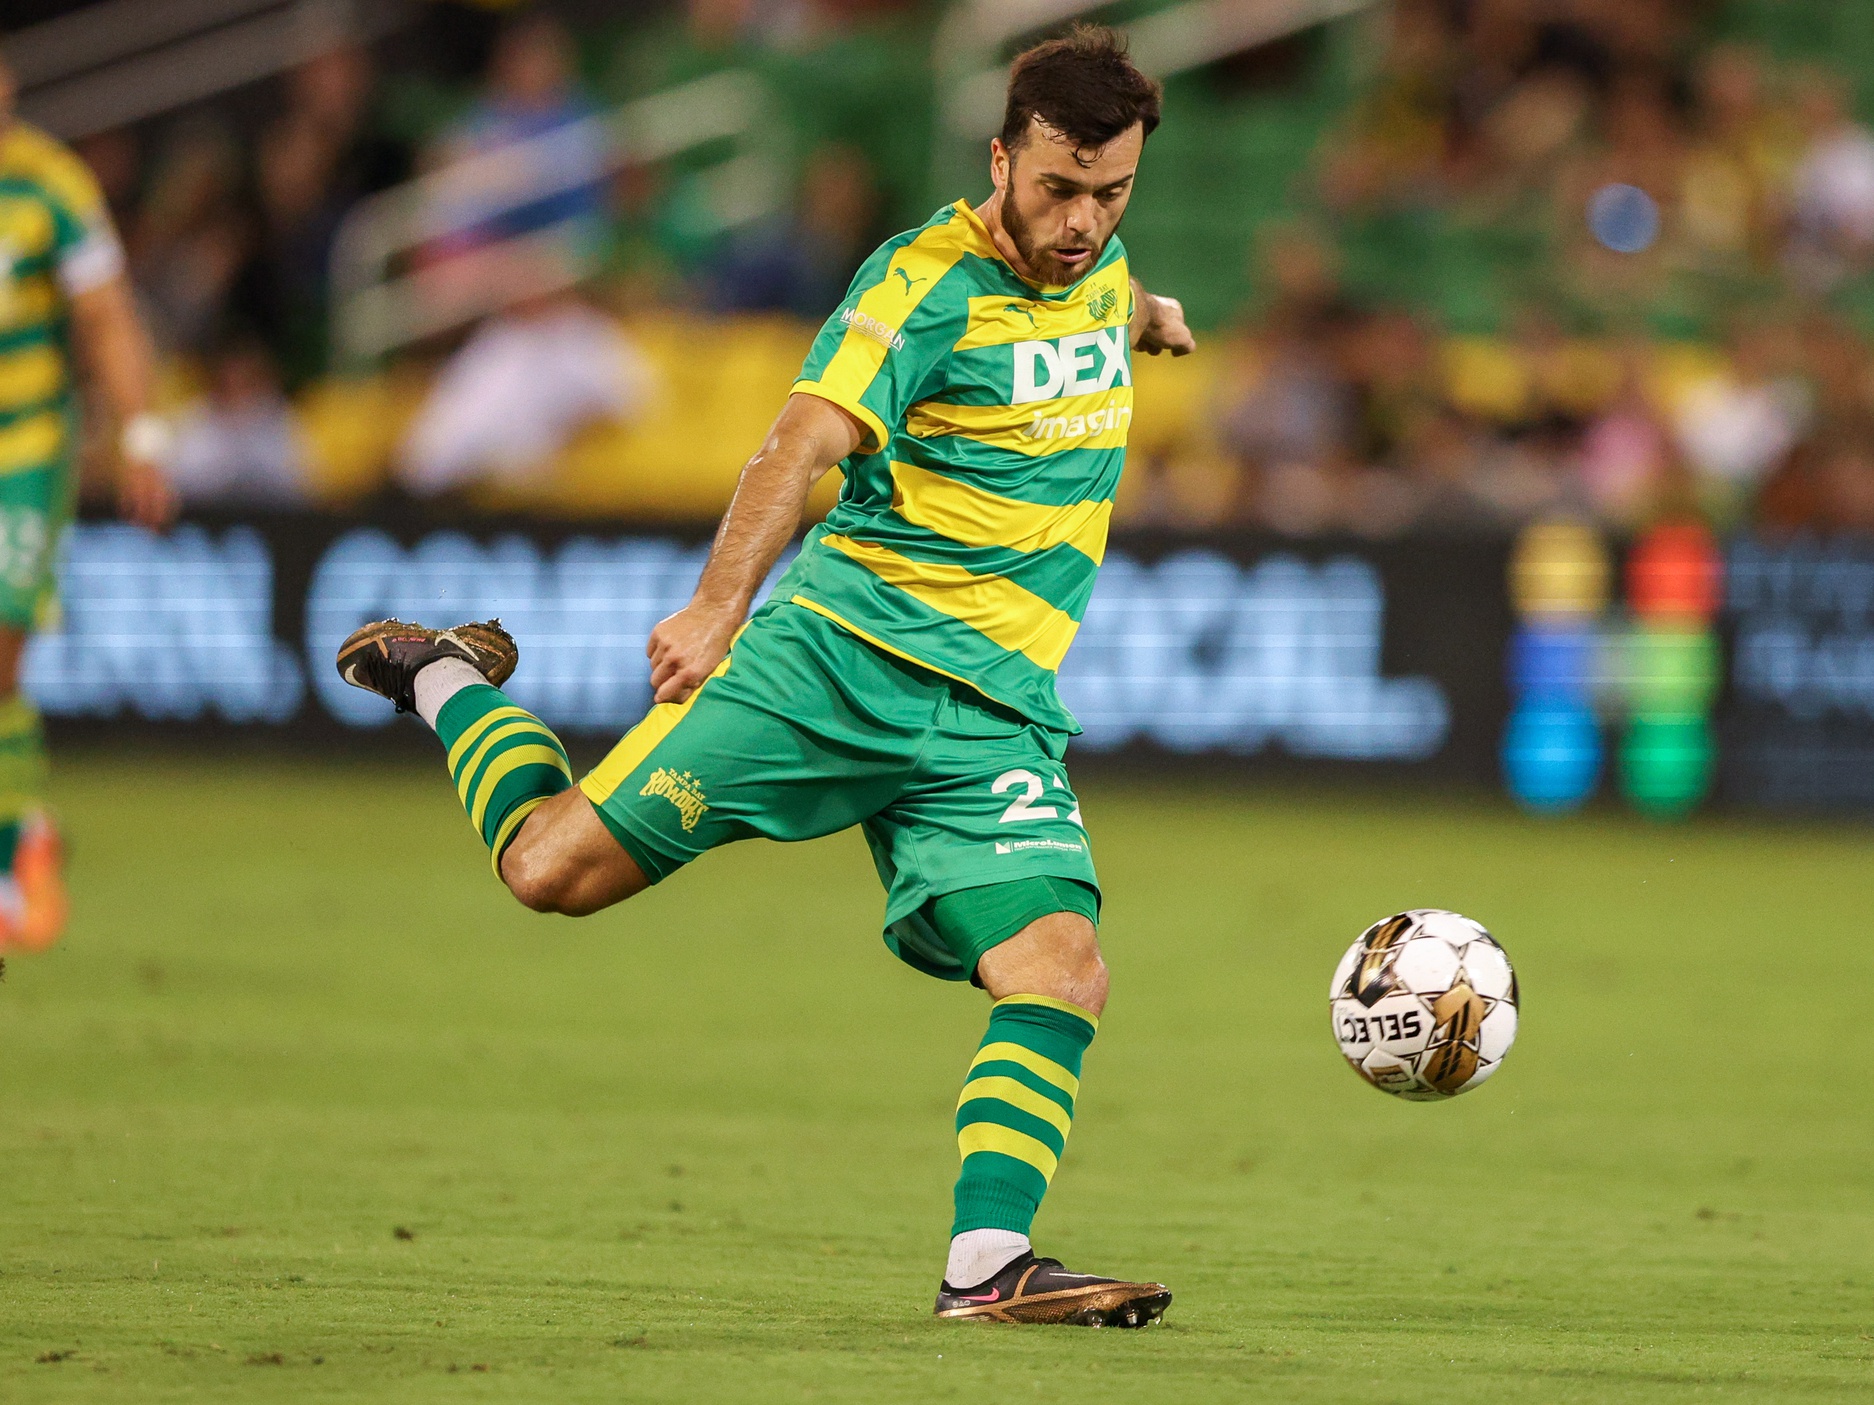 Tampa Bay Rowdies, One of The Three USL Championship Teams To Look Out For